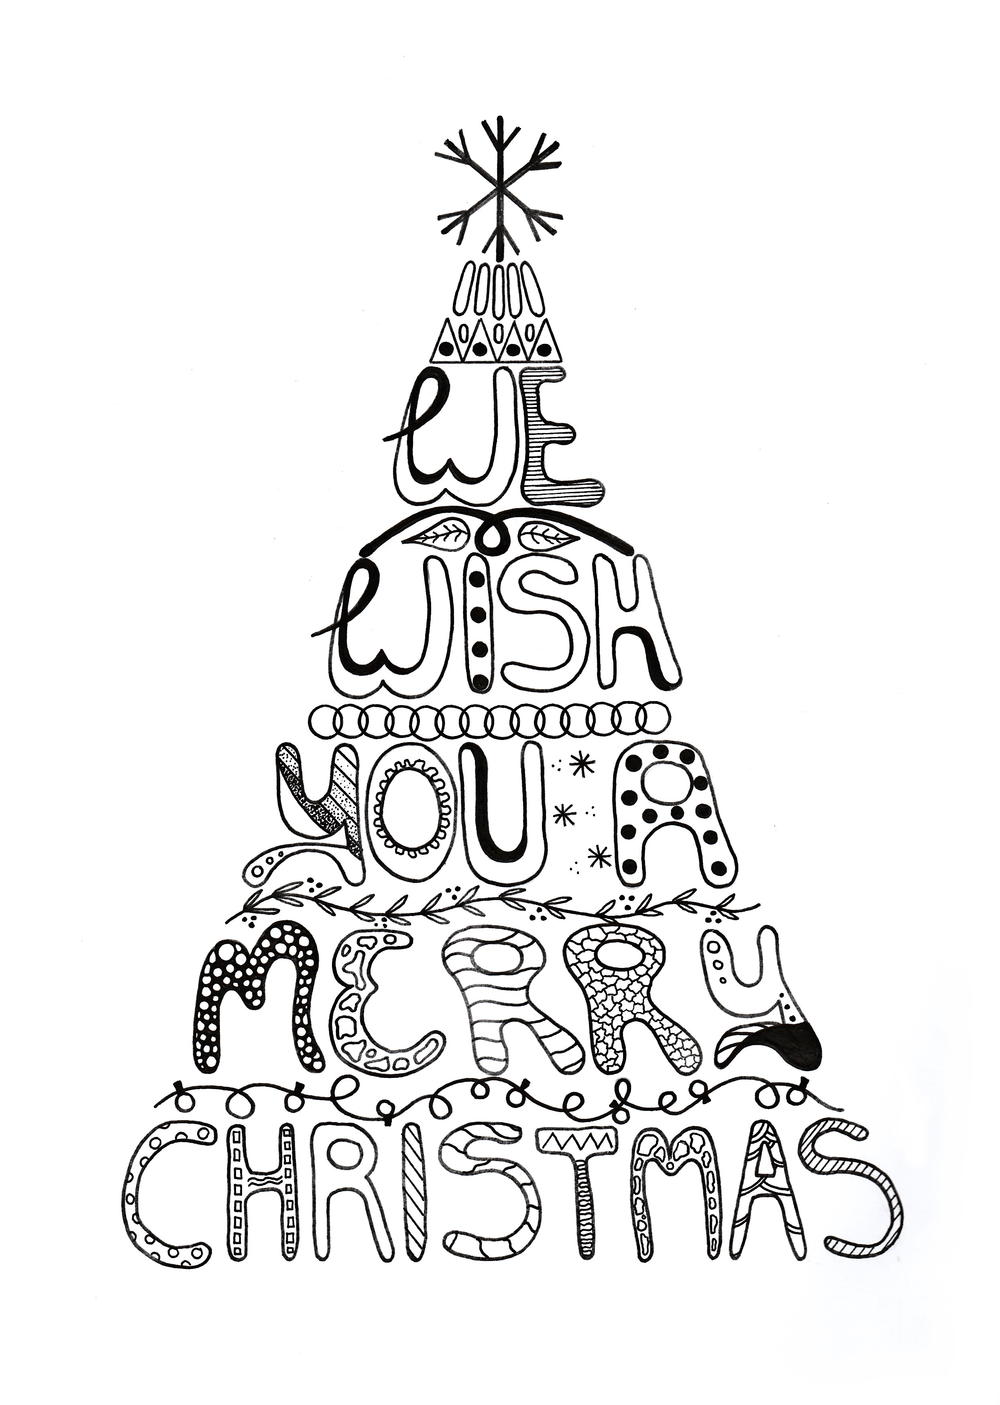 Merry Christmas Adult Coloring Page | AllFreePaperCrafts.com Christmas Presents Coloring Sheets